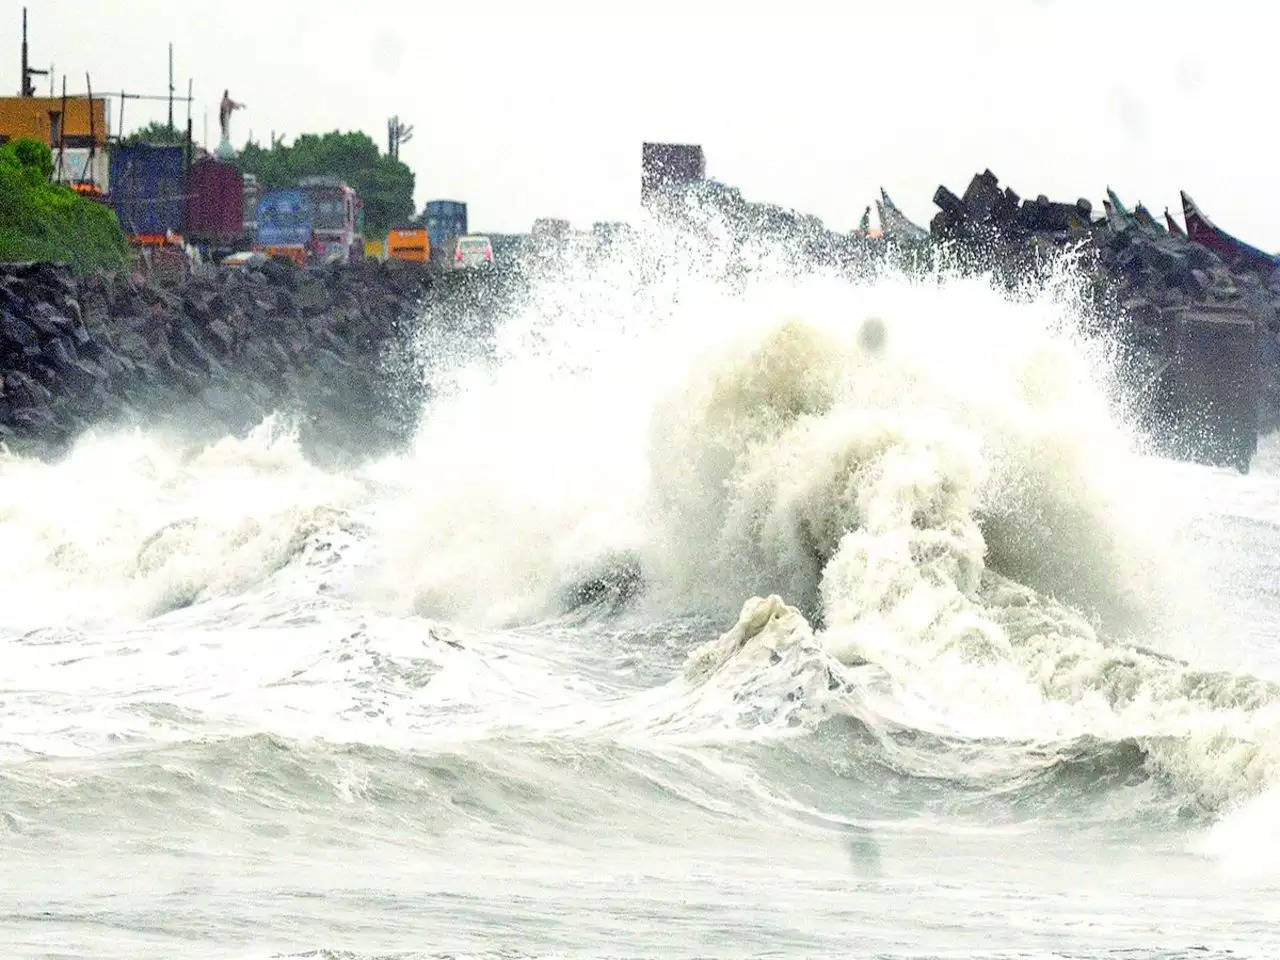 'Extremely Dangerous' Cyclone 'Biparjoy' Approaches Coast, Putting Gujarat on High Alert; Flight Operations Affected in Mumbai